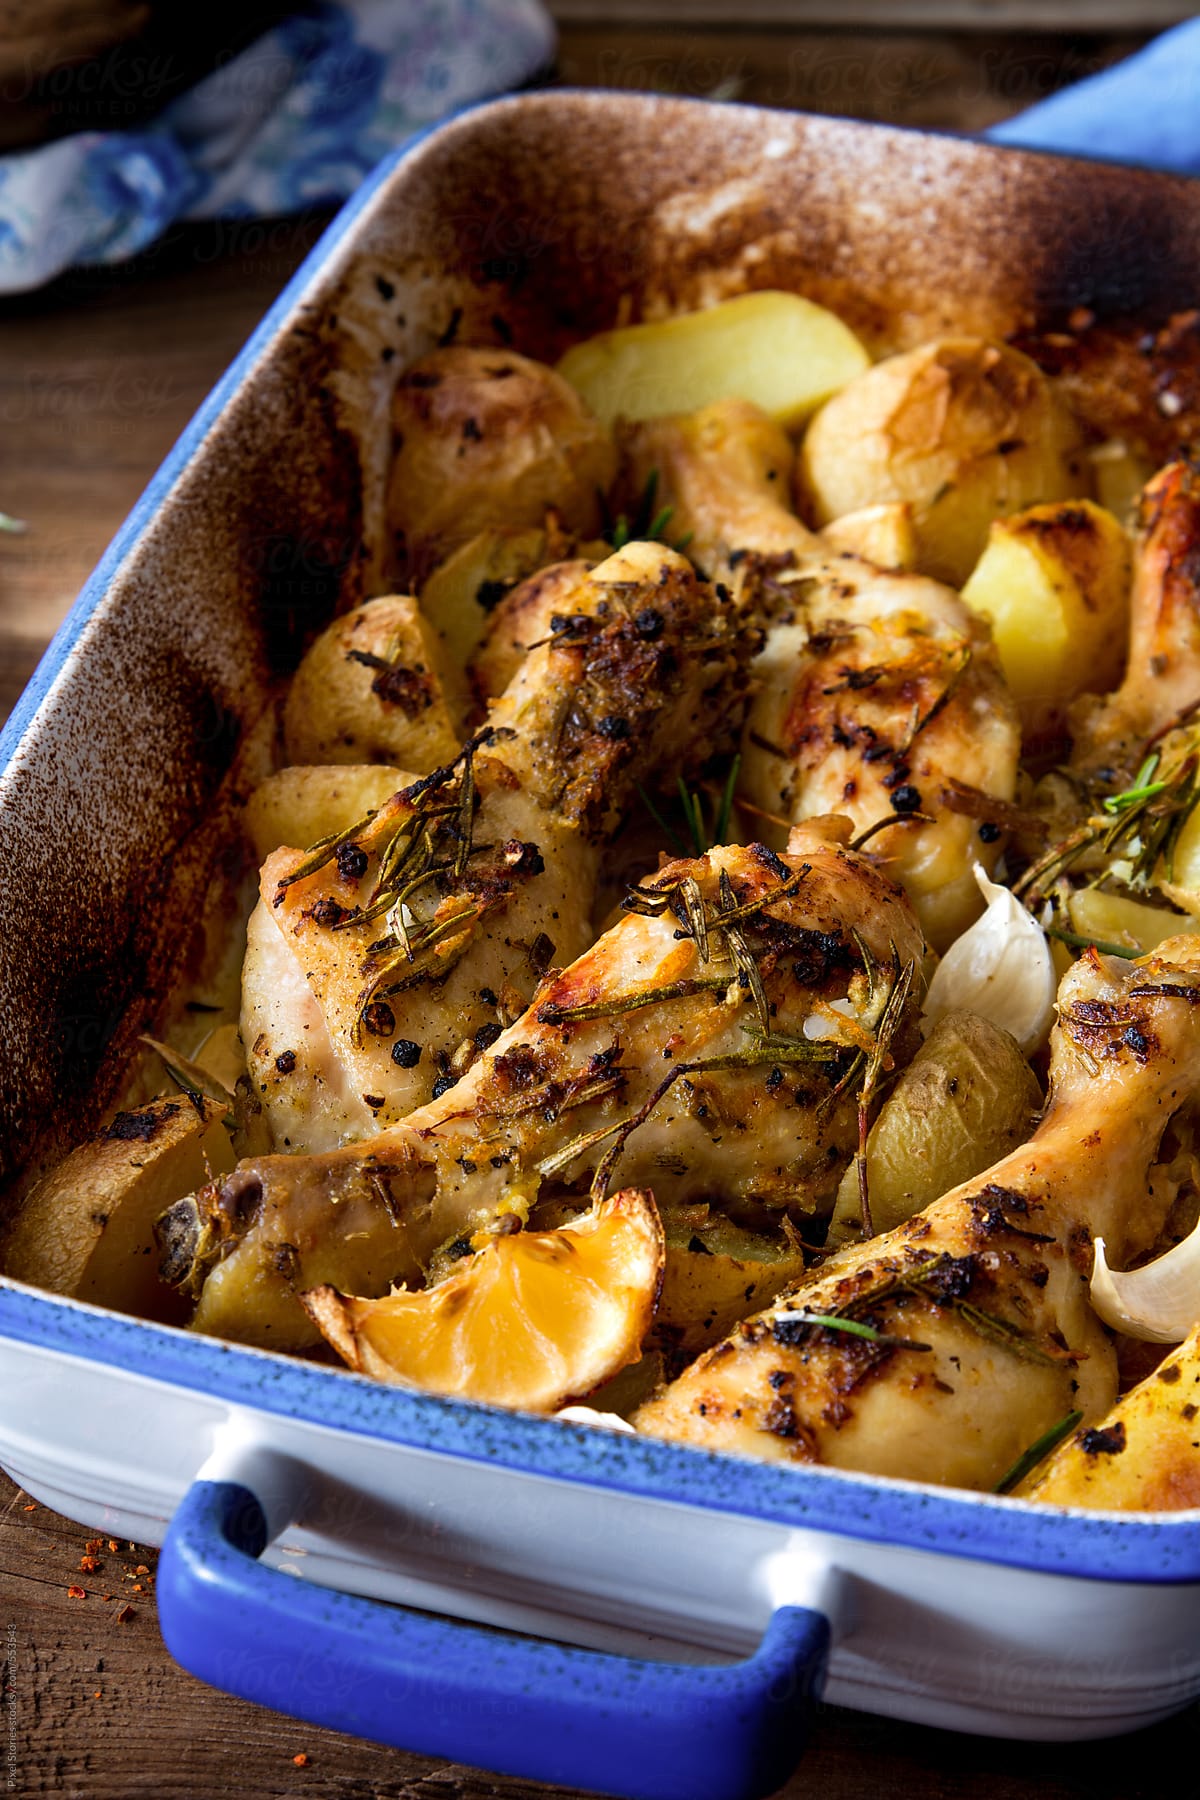 Food: roasted chicken legs on bed of potatoes and herbs